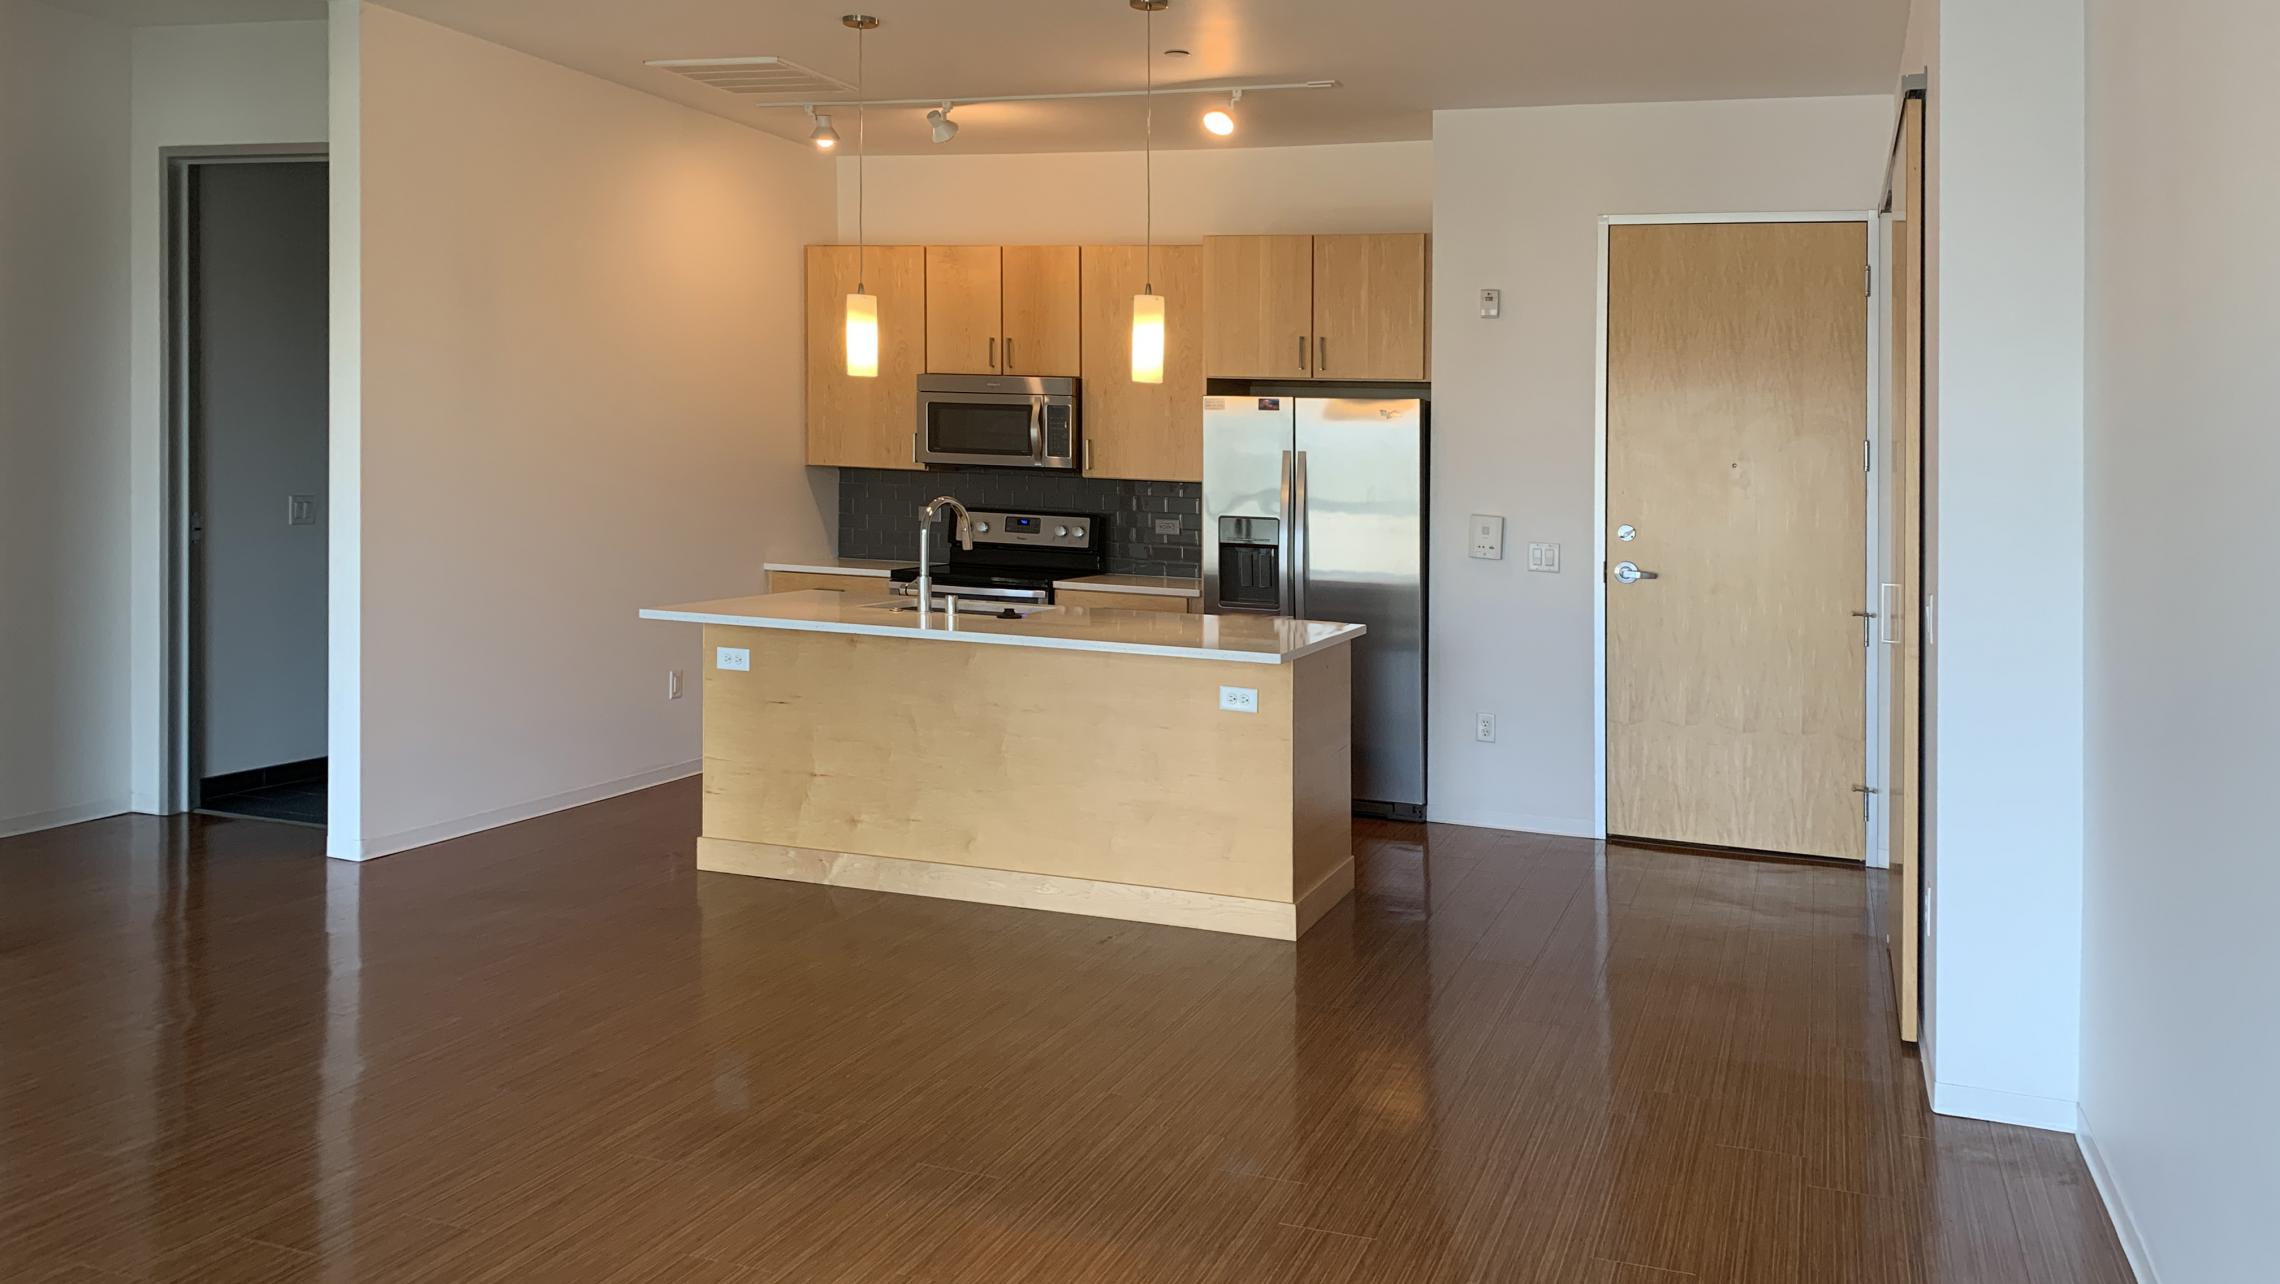 SEVEN27-at-The-Yards-Apartment-435-One-Bedroom-Modern-Upscale-Luxury-Downtown-Madison-Lake-View-Balcony-Fitness-Gym-Coutyard-Lounge-Capitol-Bike-Lifestyle-Living